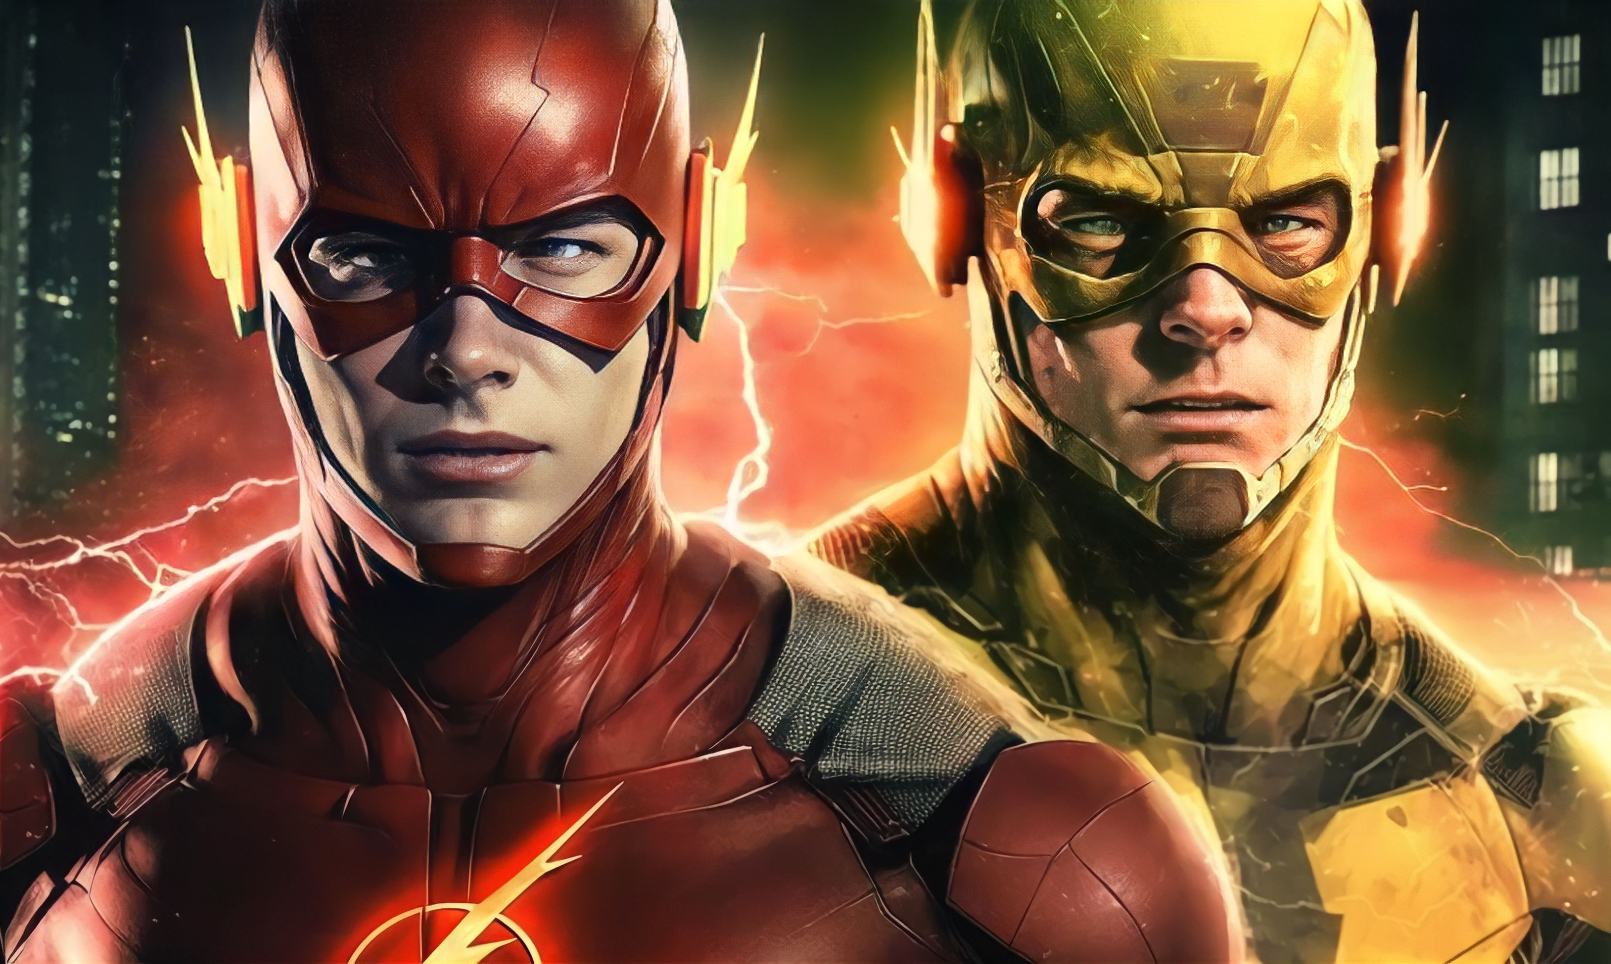 The Flash and Reverse Flash by Buffy2ville on DeviantArt